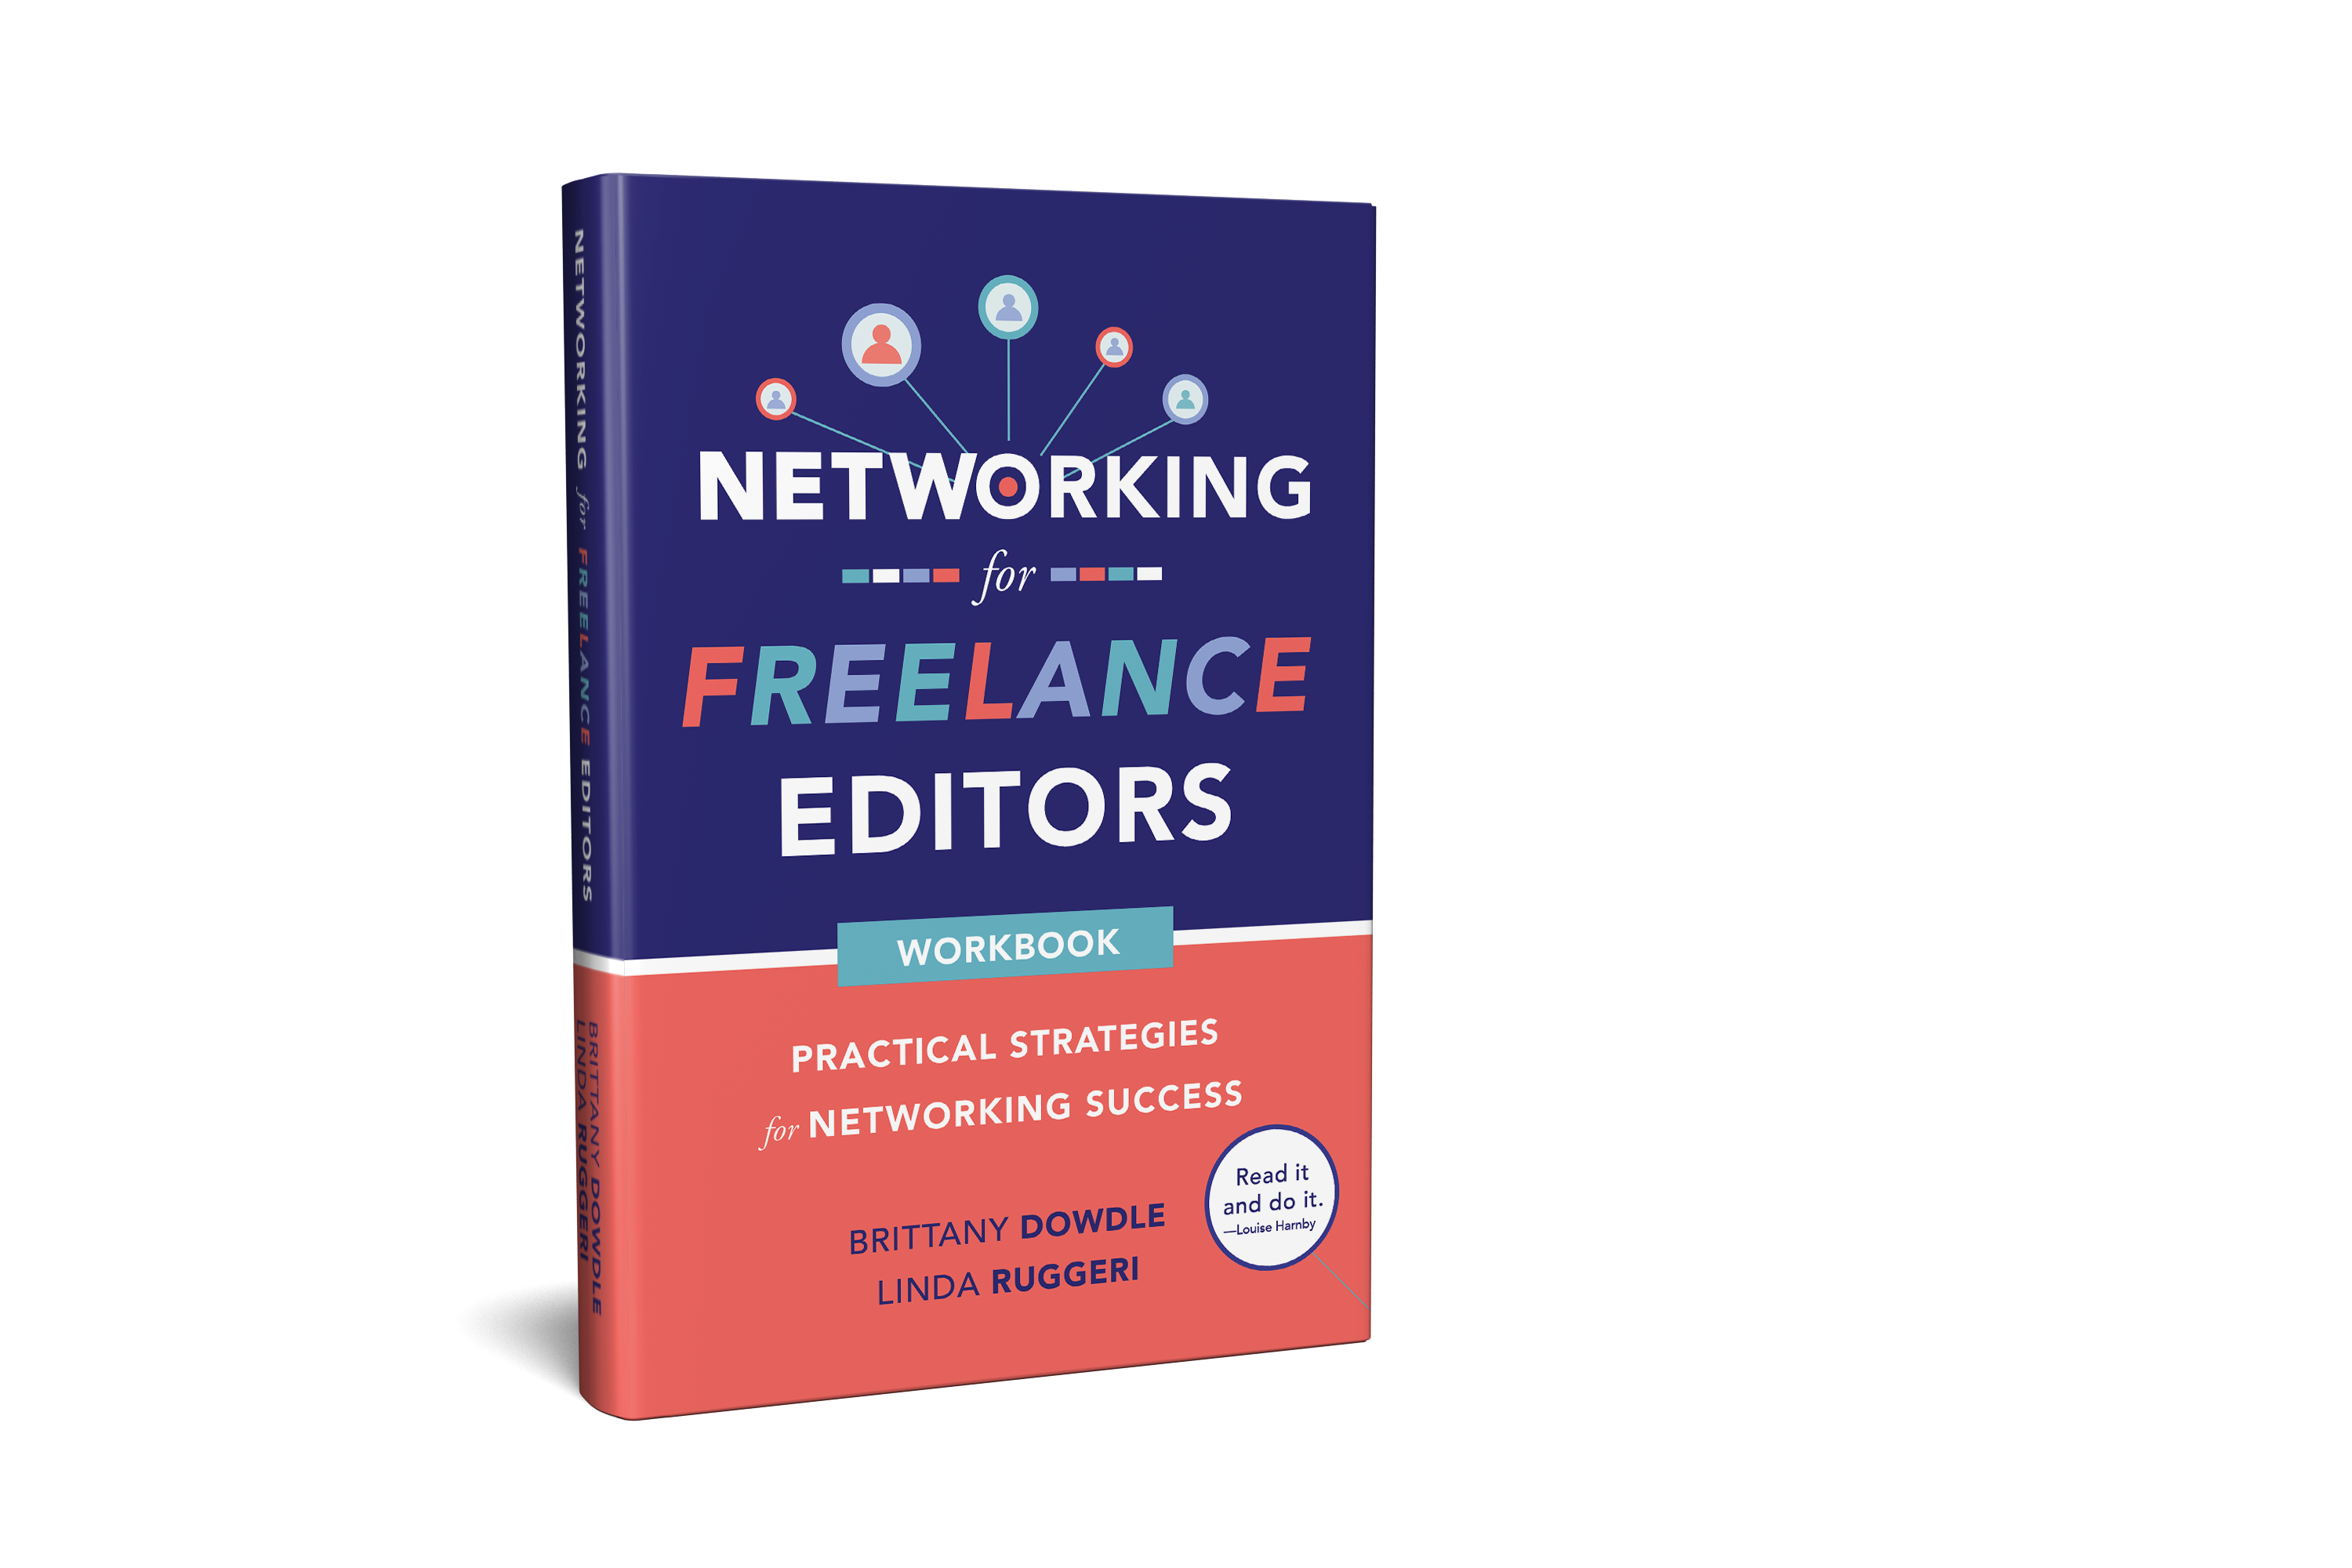 Cover of Networking for Freelance Editors: Practical Strategies for Networking Success, by Brittany Dowdle and Linda Ruggeri.